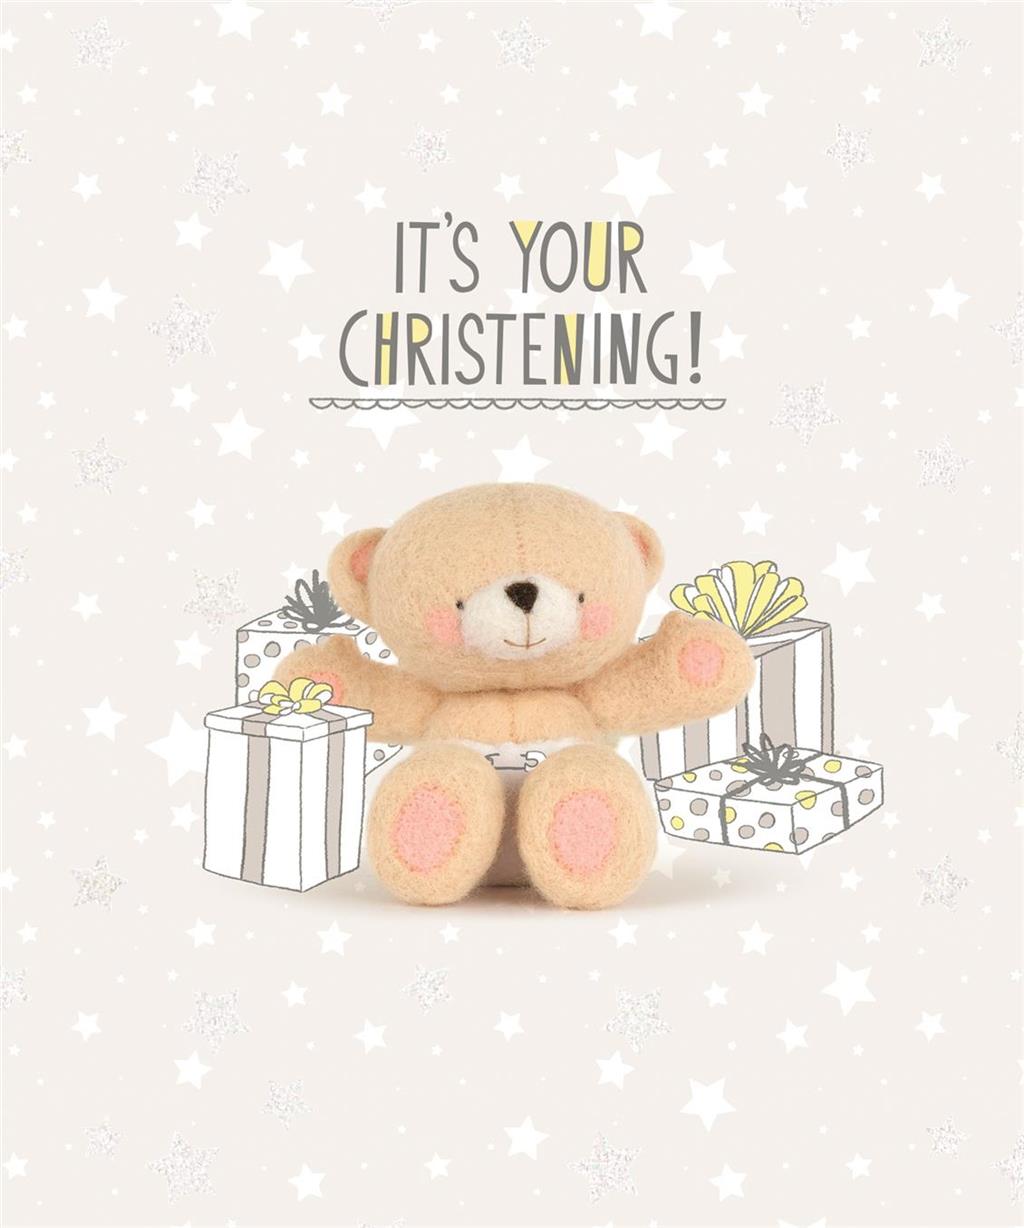 It's Your Christening Cute Teddy Bear Design Open Greeting Card